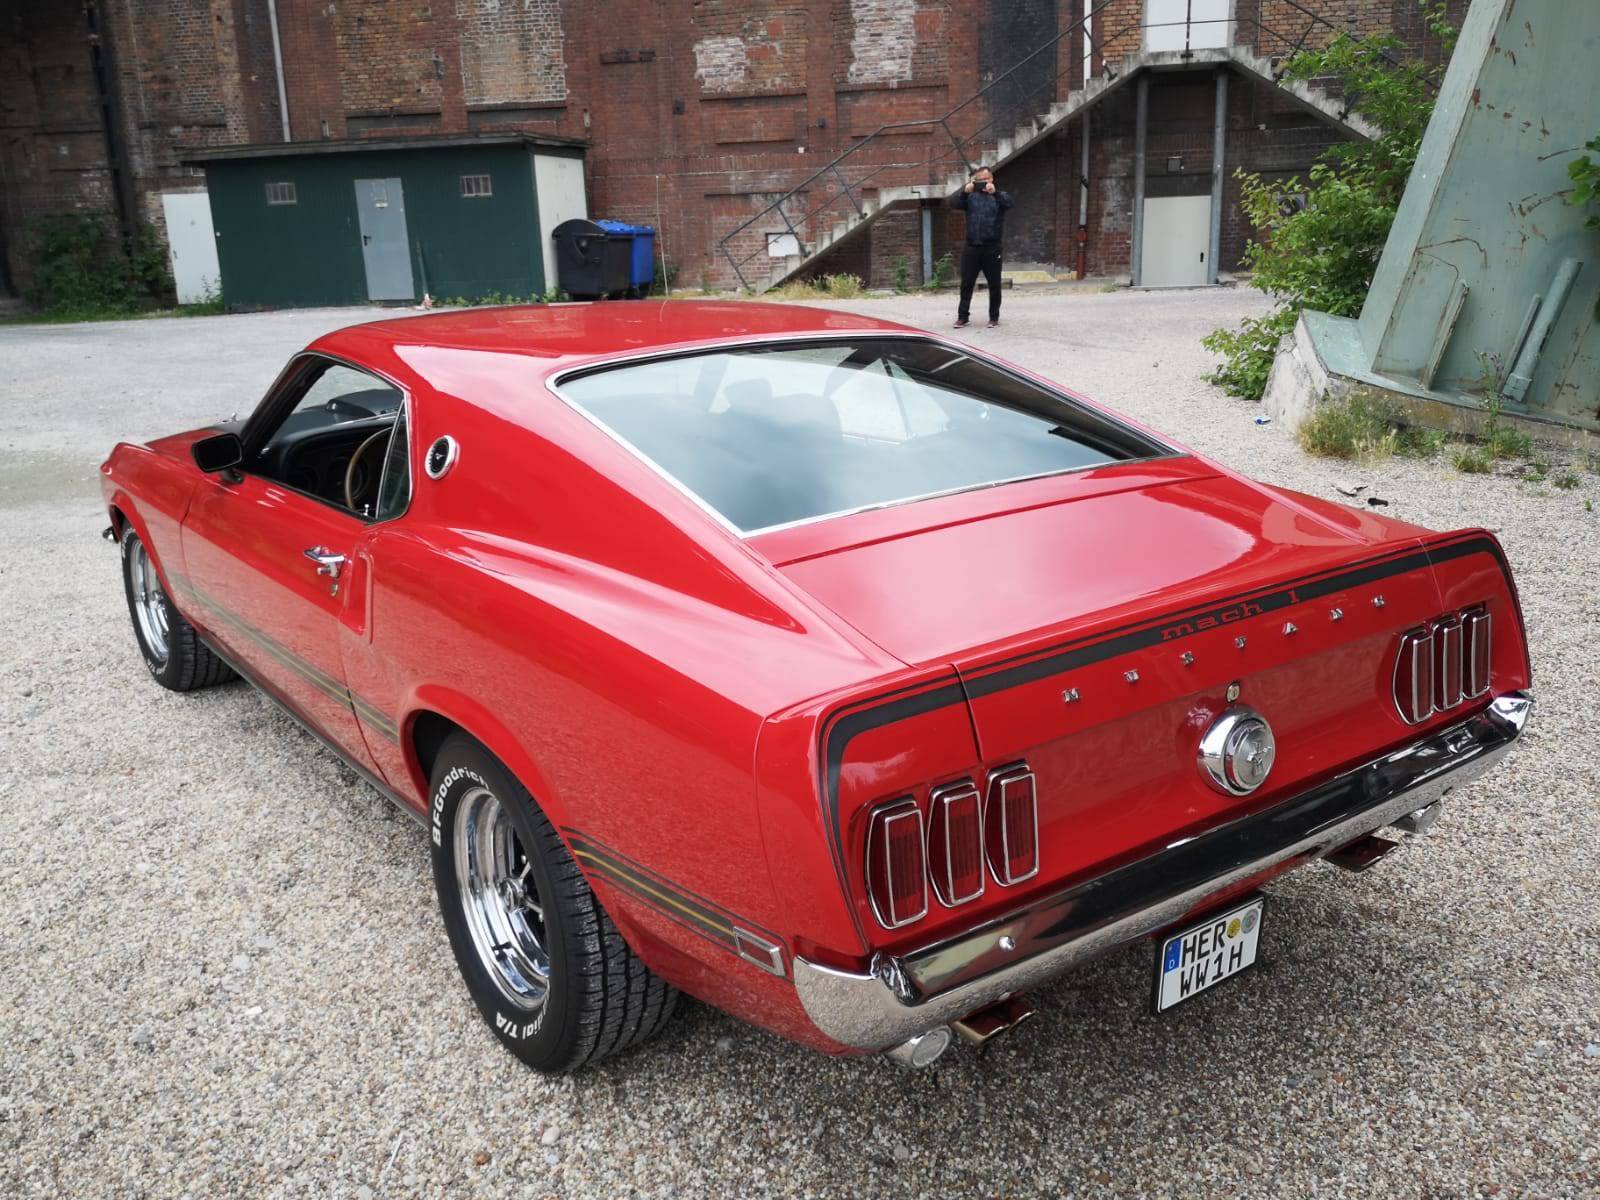 For Sale: Ford Mustang Mach 1 (1969) offered for €89,000